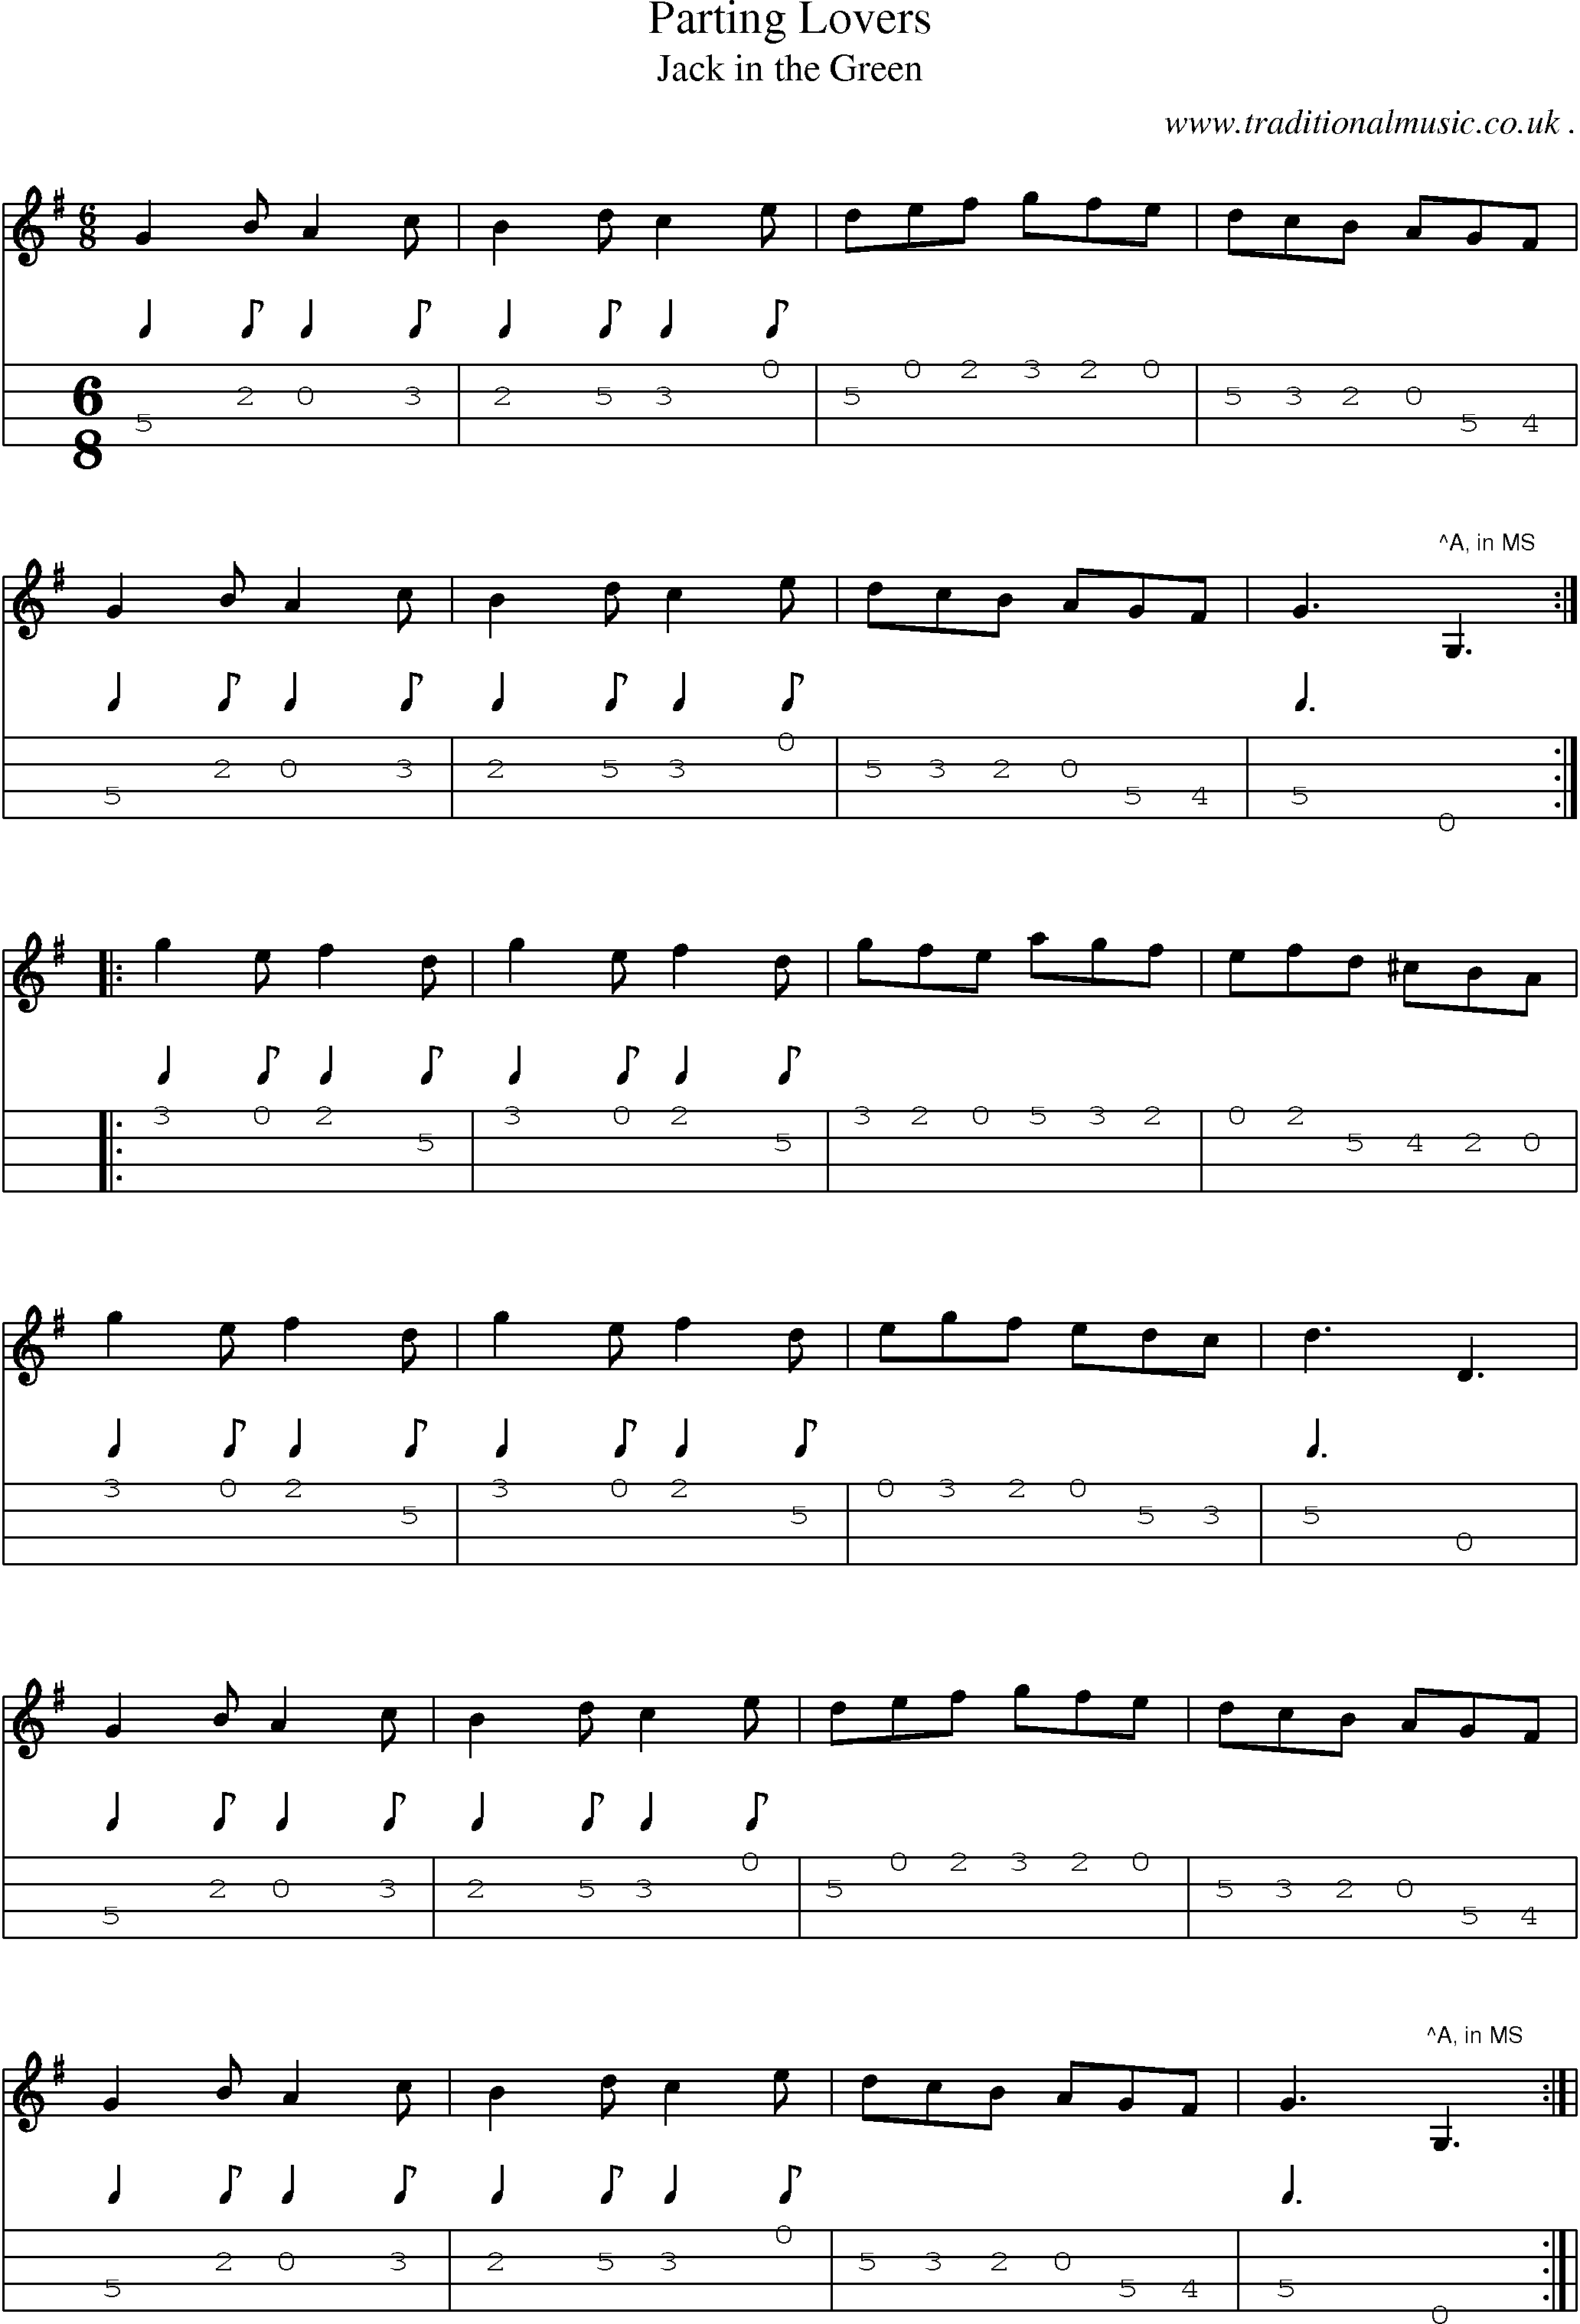 Sheet-Music and Mandolin Tabs for Parting Lovers